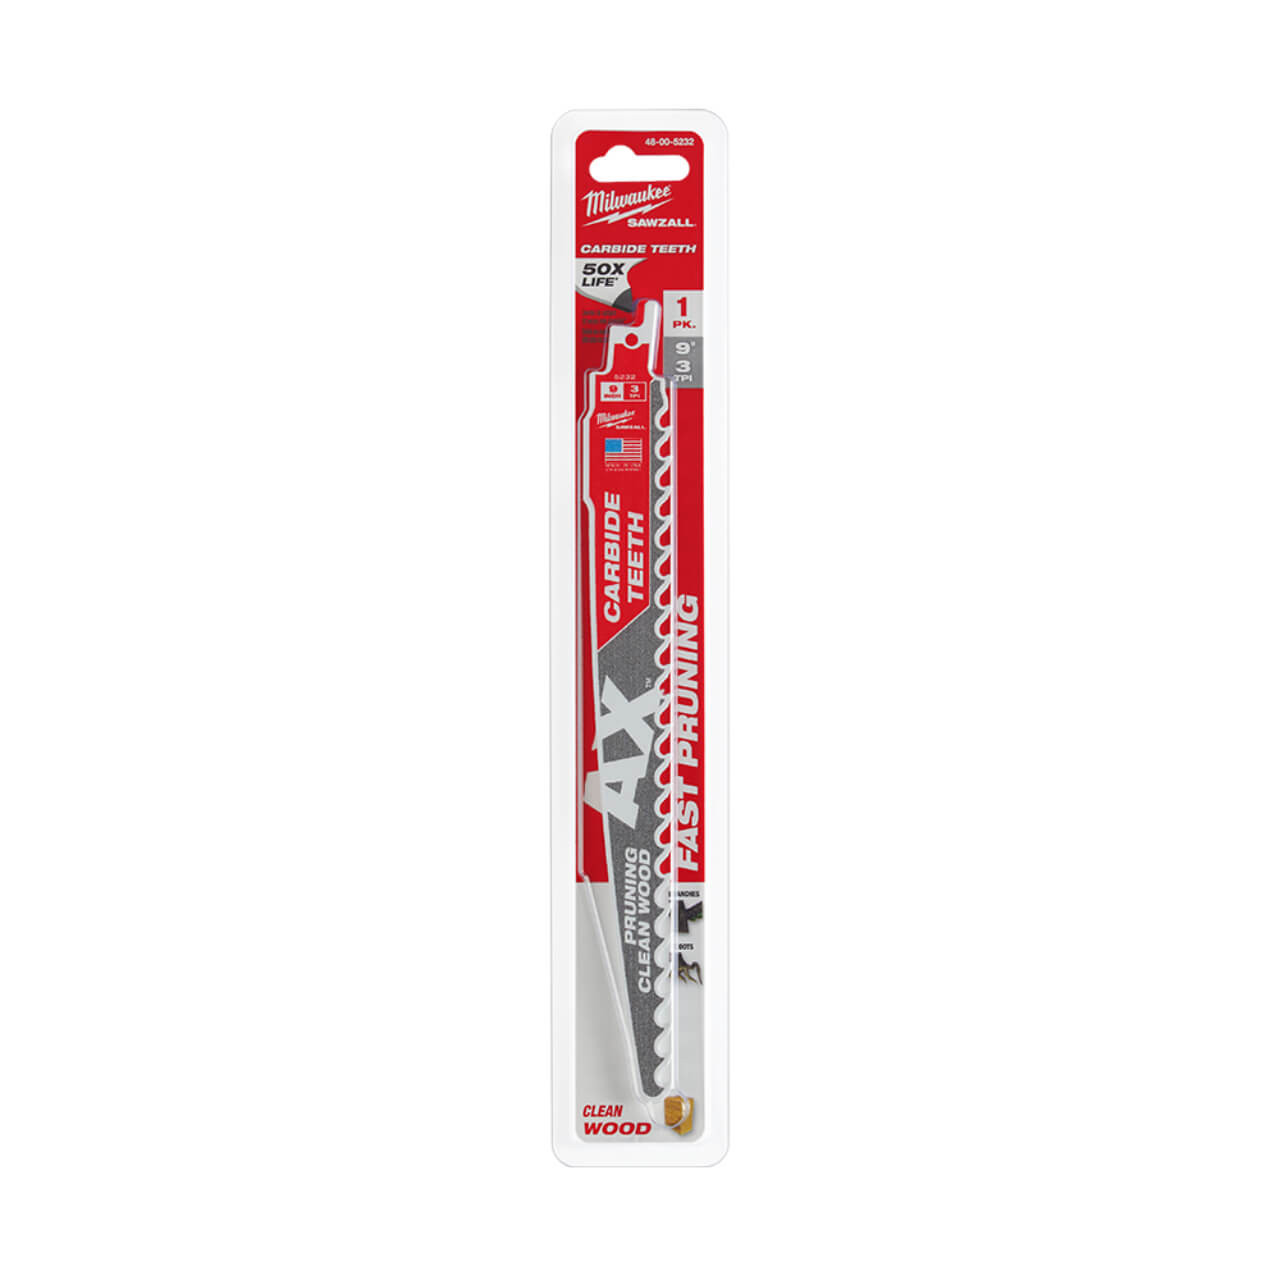 Milwaukee Sawzall 225mm The Ax With Carbide Teeth For Pruning & Clean Wood Reciprocating Saw Blade